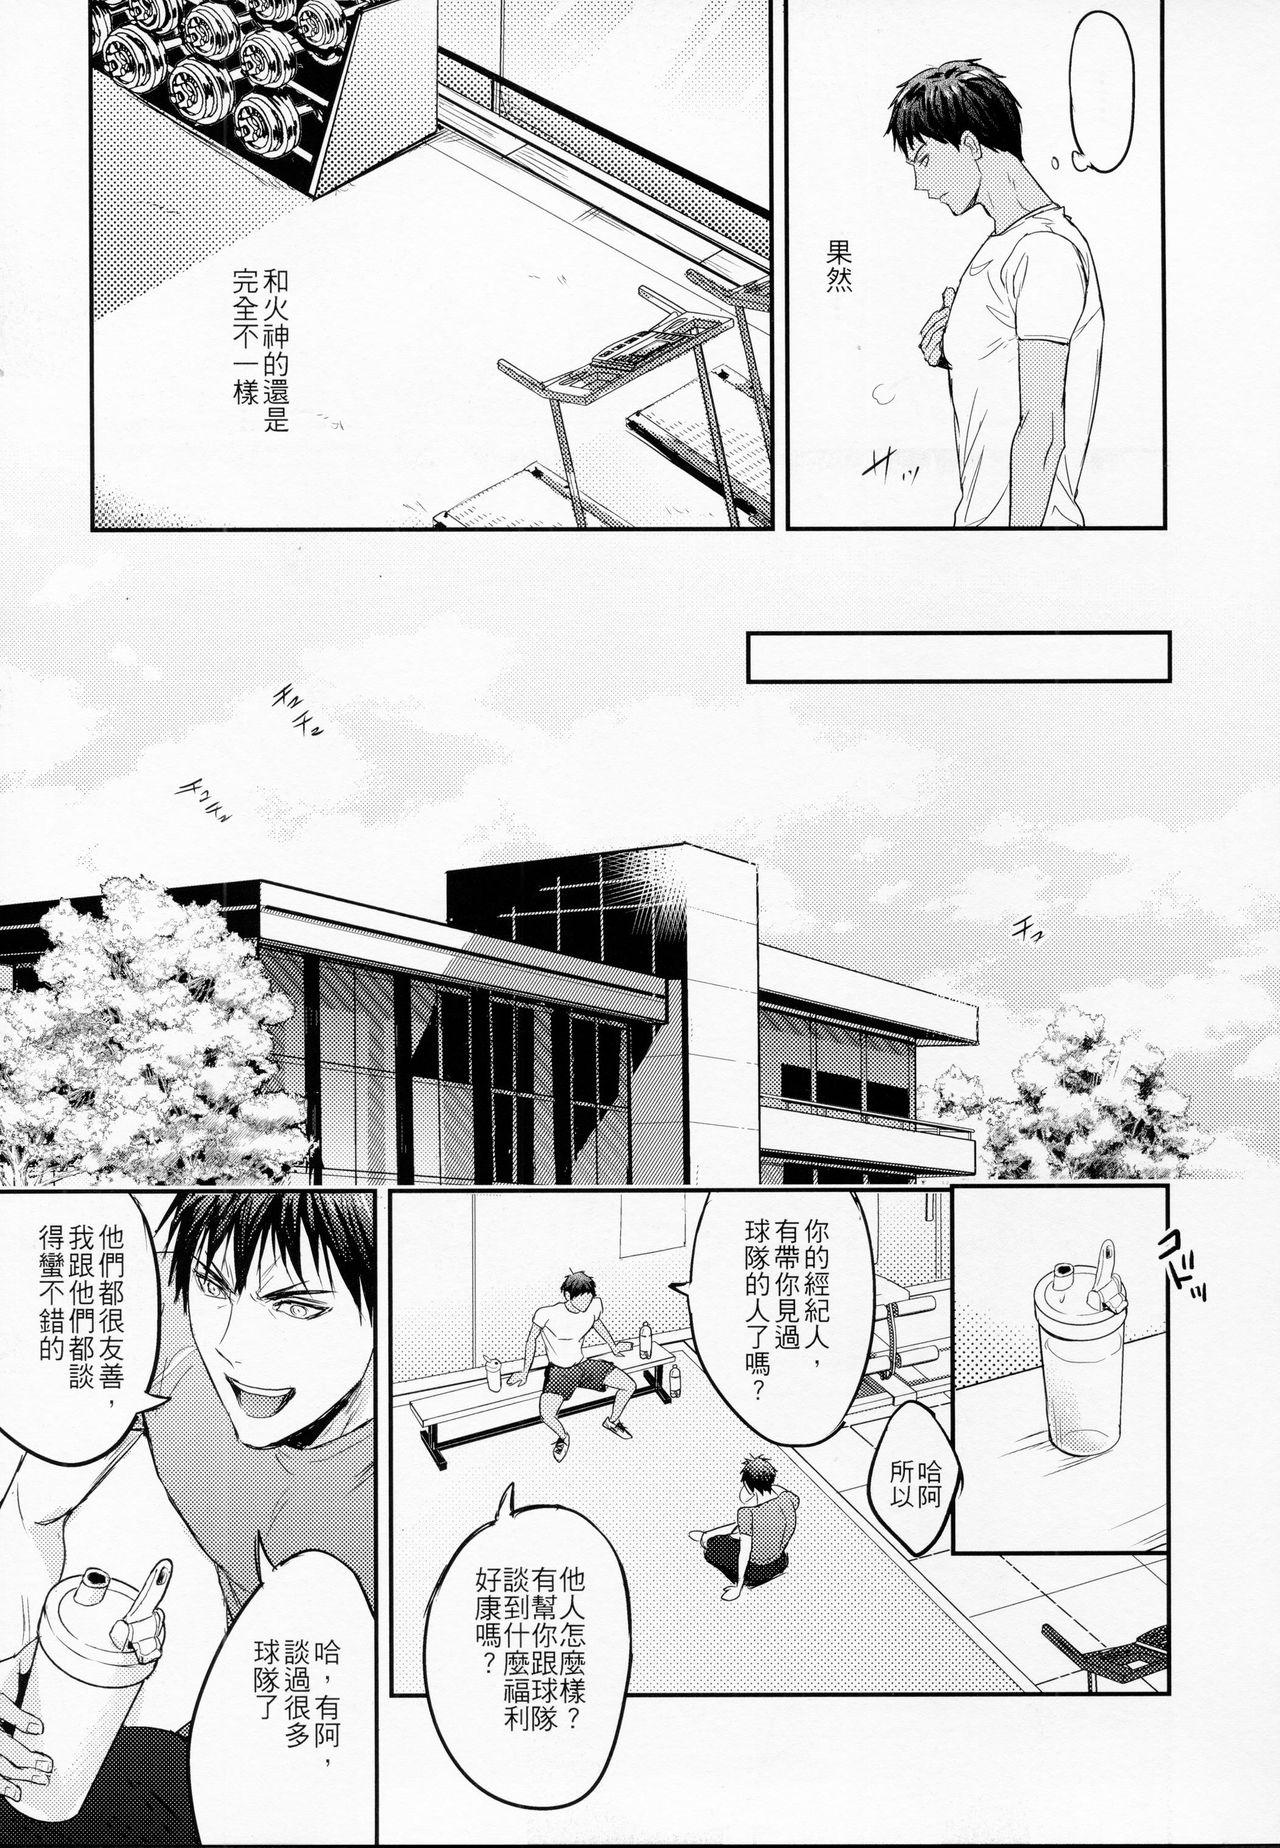 Rebolando This is how we WORK IT OUT - Kuroko no basuke Funny - Page 6